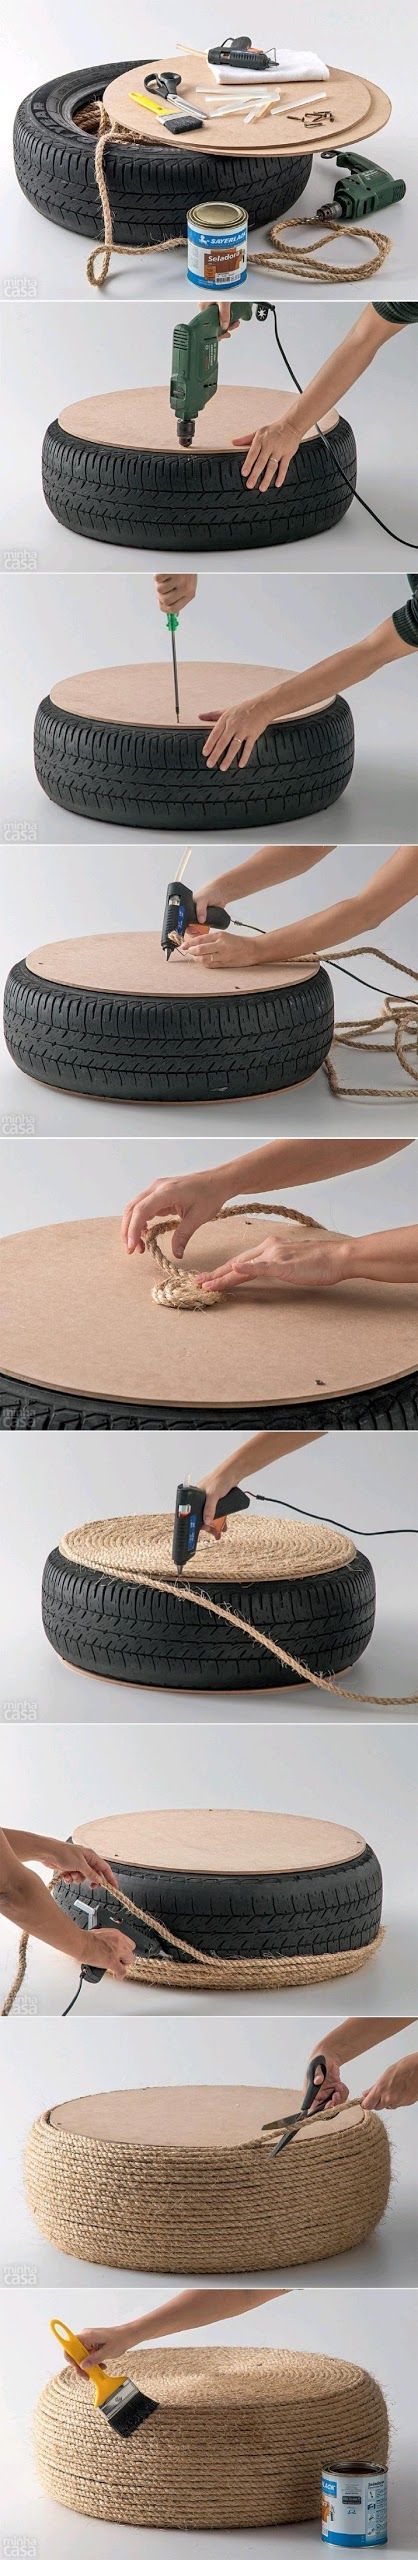 Got a spare tire? Wrap it with rope for a cool nautical floor cushion. How to ma